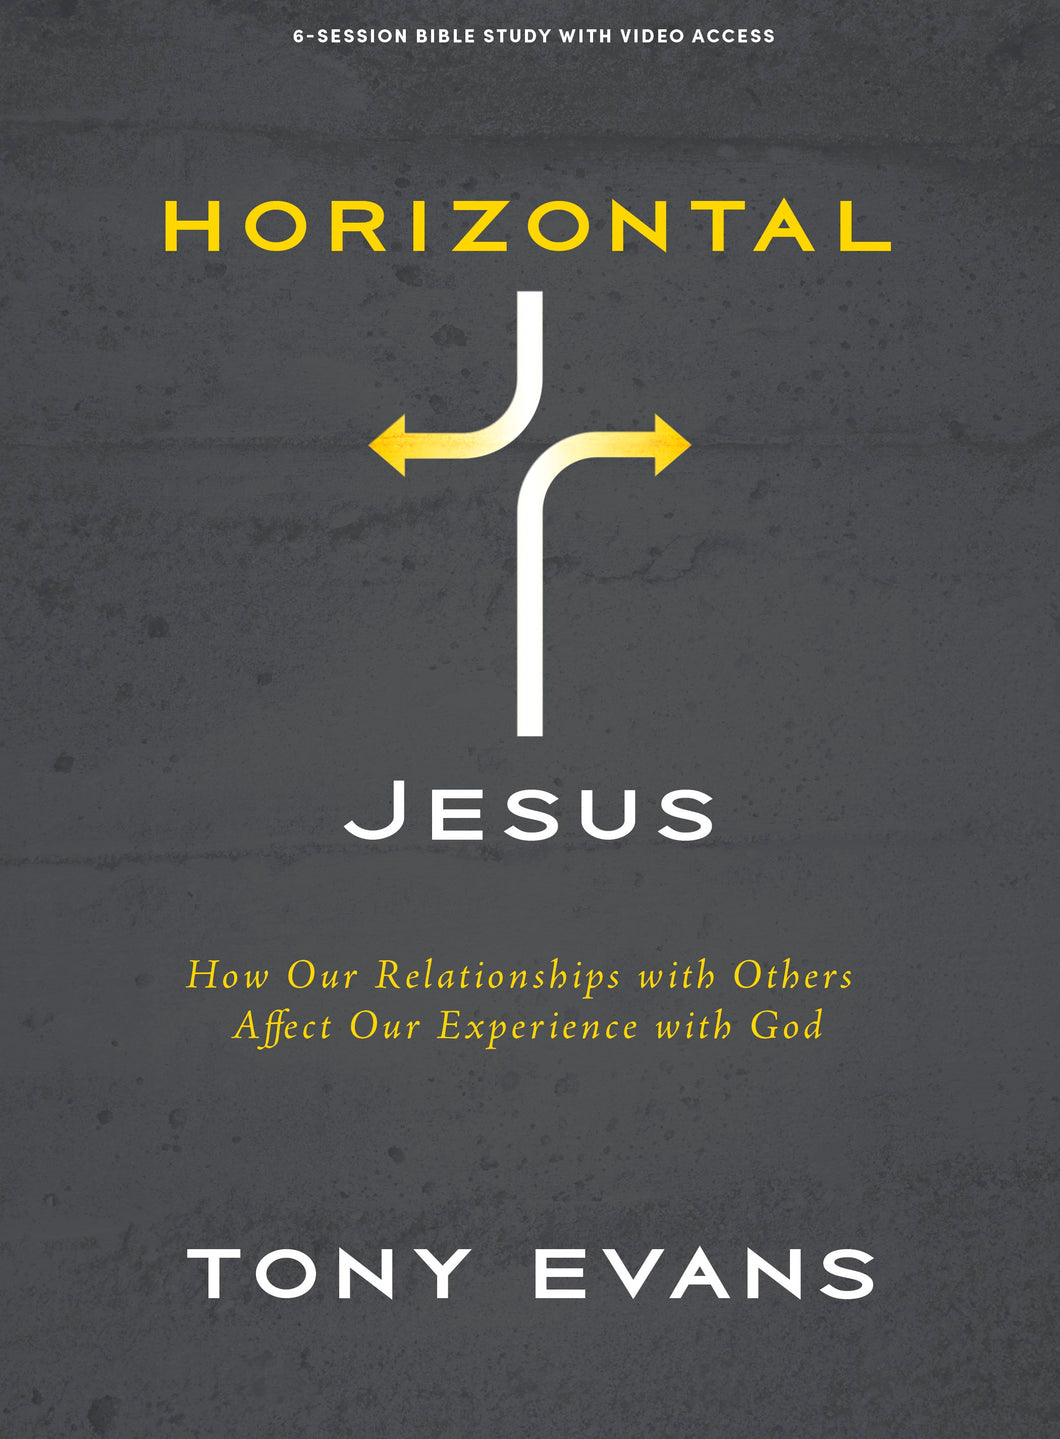 Horizontal Jesus Bible Study Book With Video Access